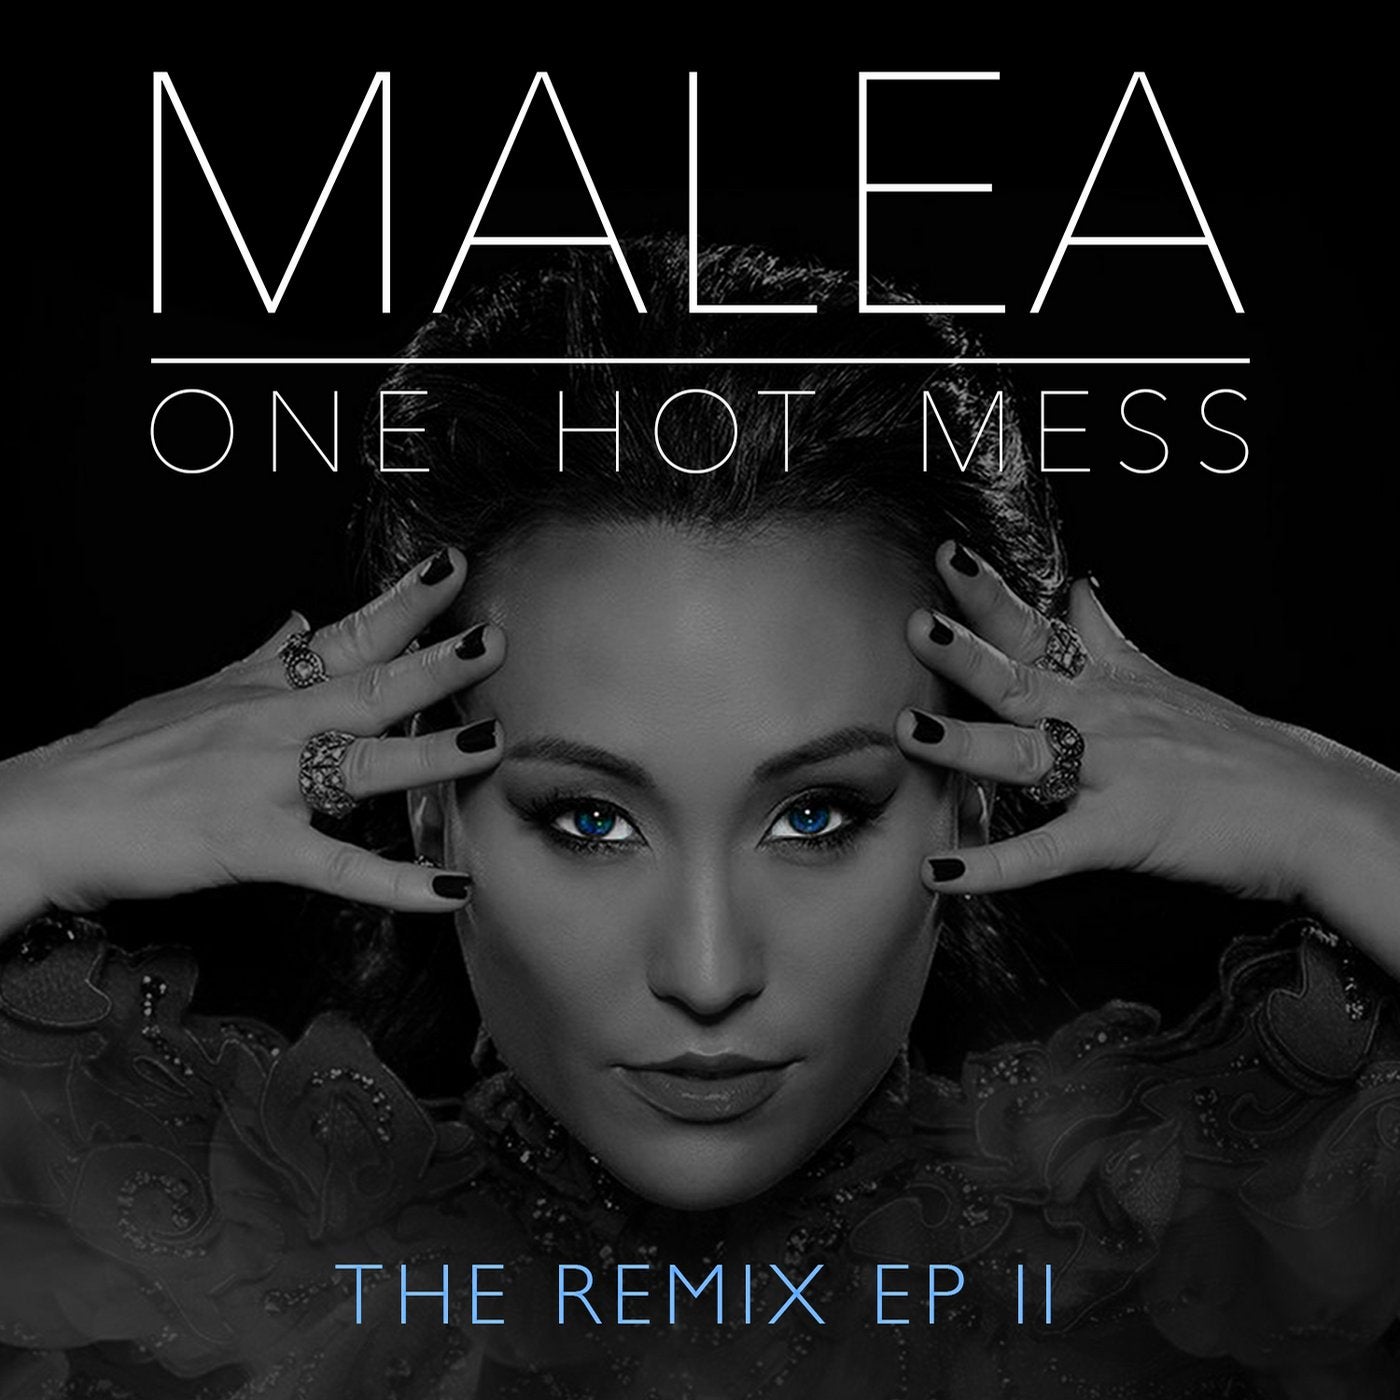 One Hot Mess - The Remix EP II